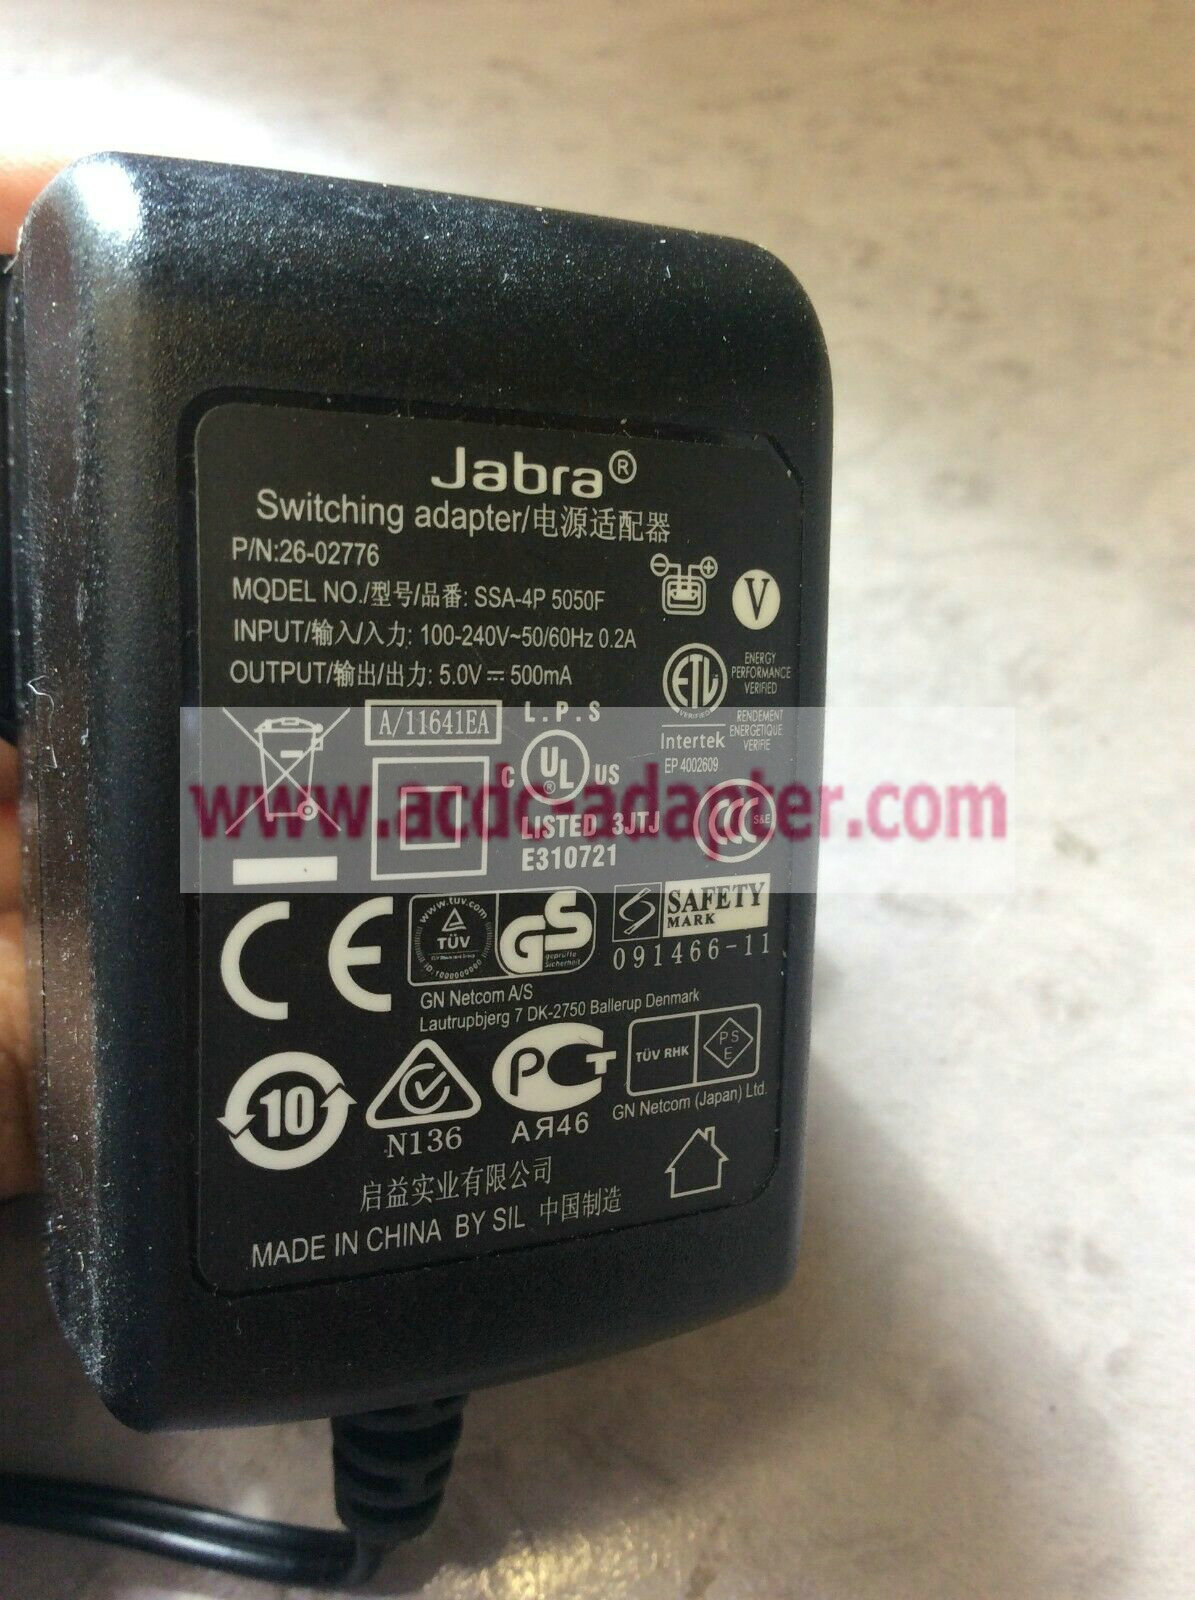 New Jabra SSA-4P 5050F 26-02776 Charger 5V 500mA ABR183 10648 Power Supply - Click Image to Close